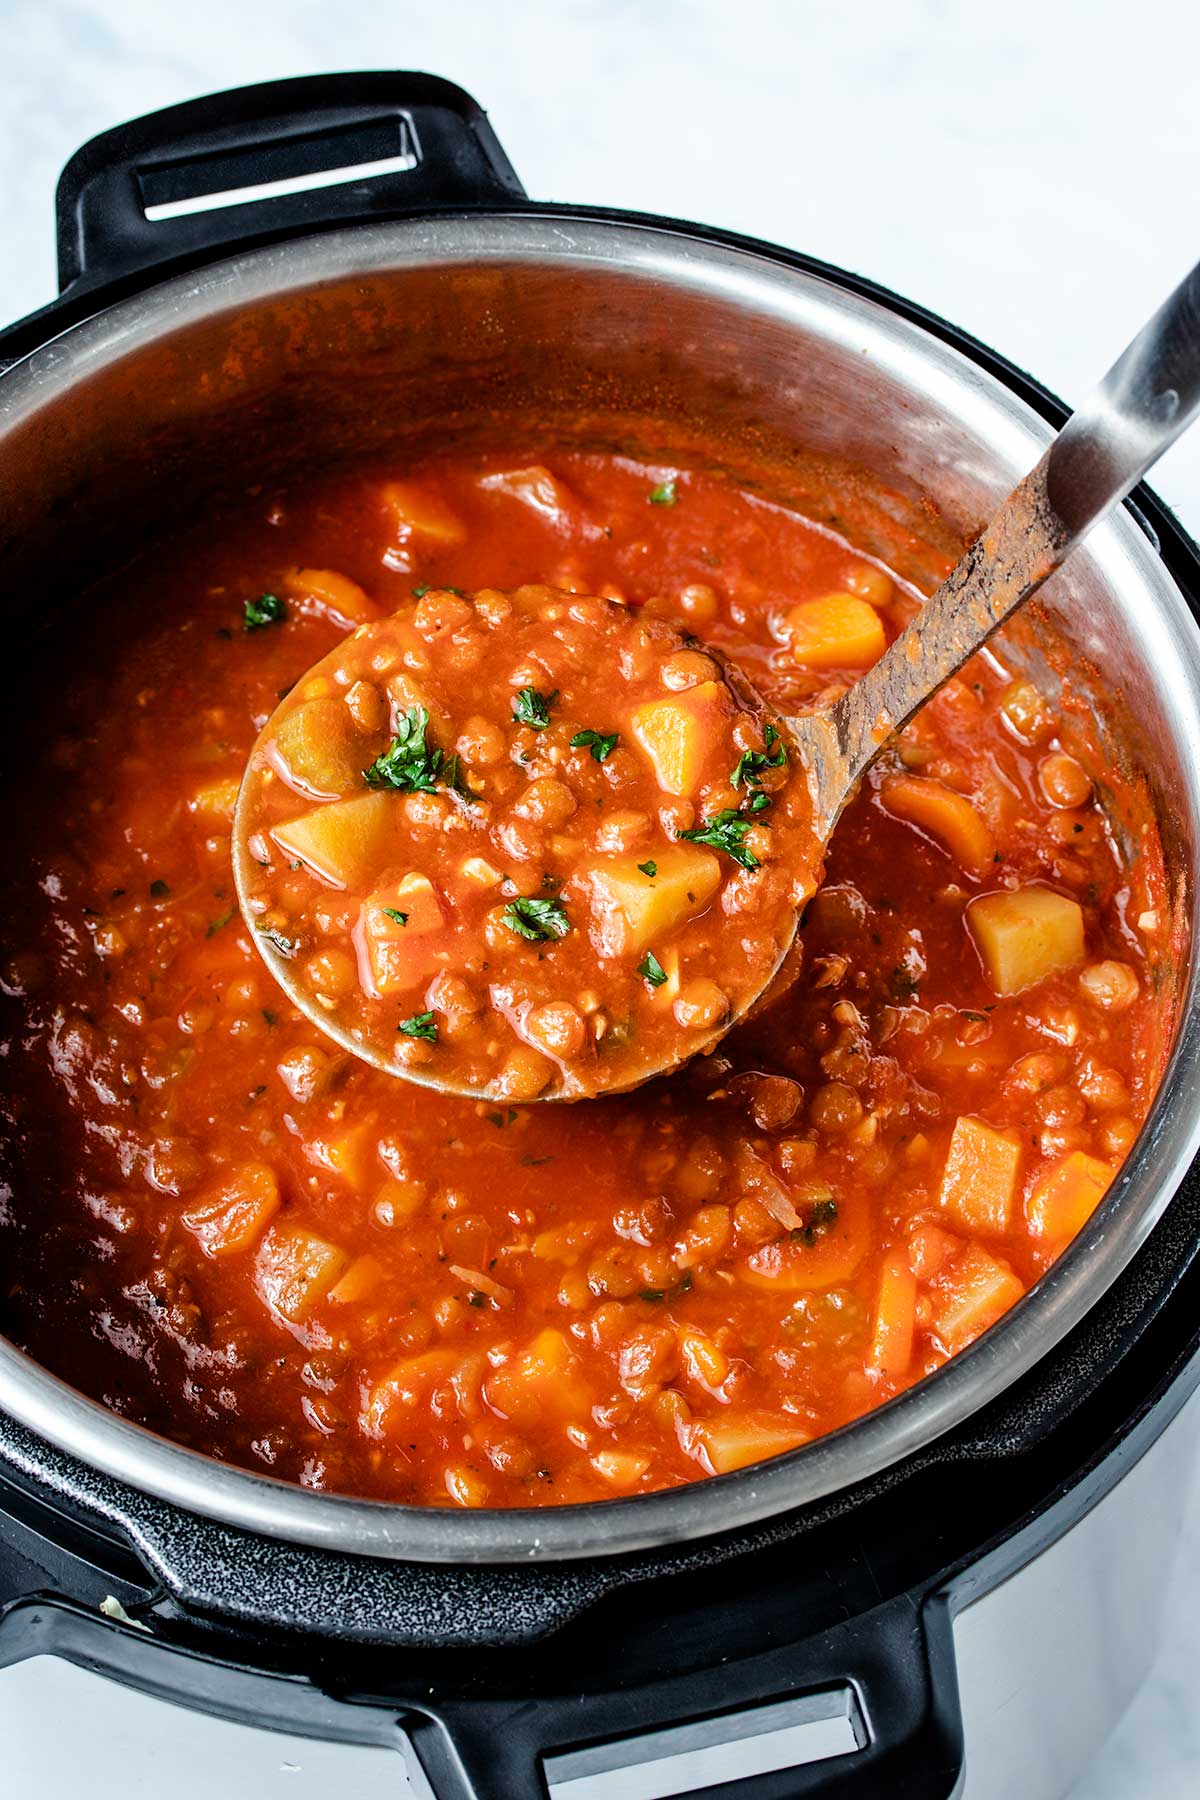 A ladle full of lentil soup being held over an Instant Pot.